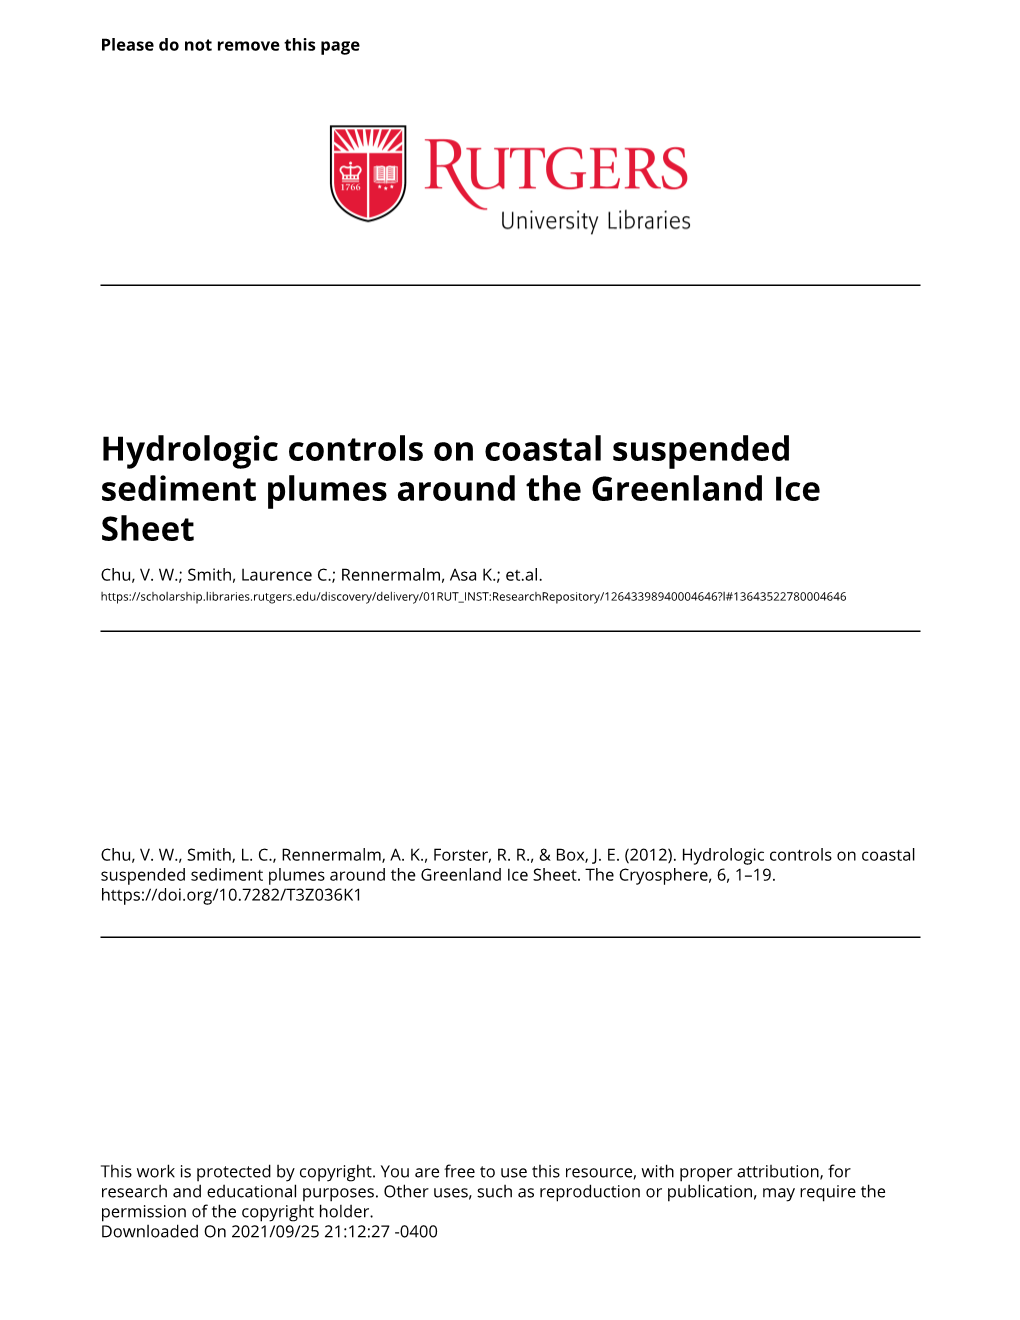 Hydrologic Controls on Coastal Suspended Sediment Plumes Around the Greenland Ice Sheet